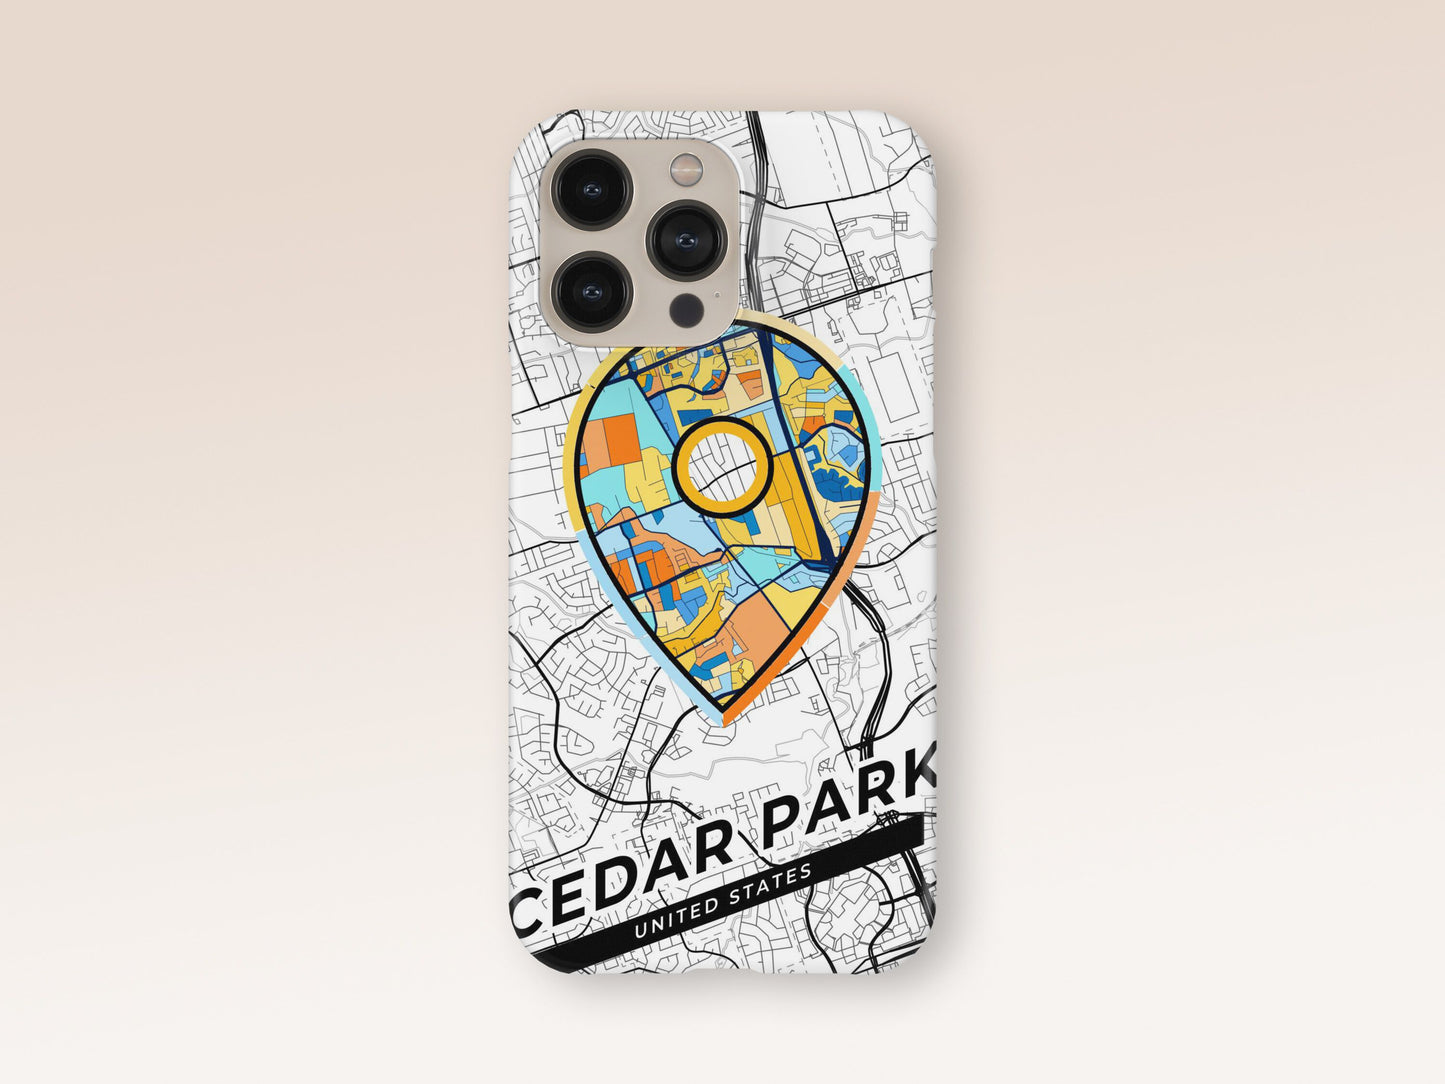 Cedar Park Texas slim phone case with colorful icon. Birthday, wedding or housewarming gift. Couple match cases. 1